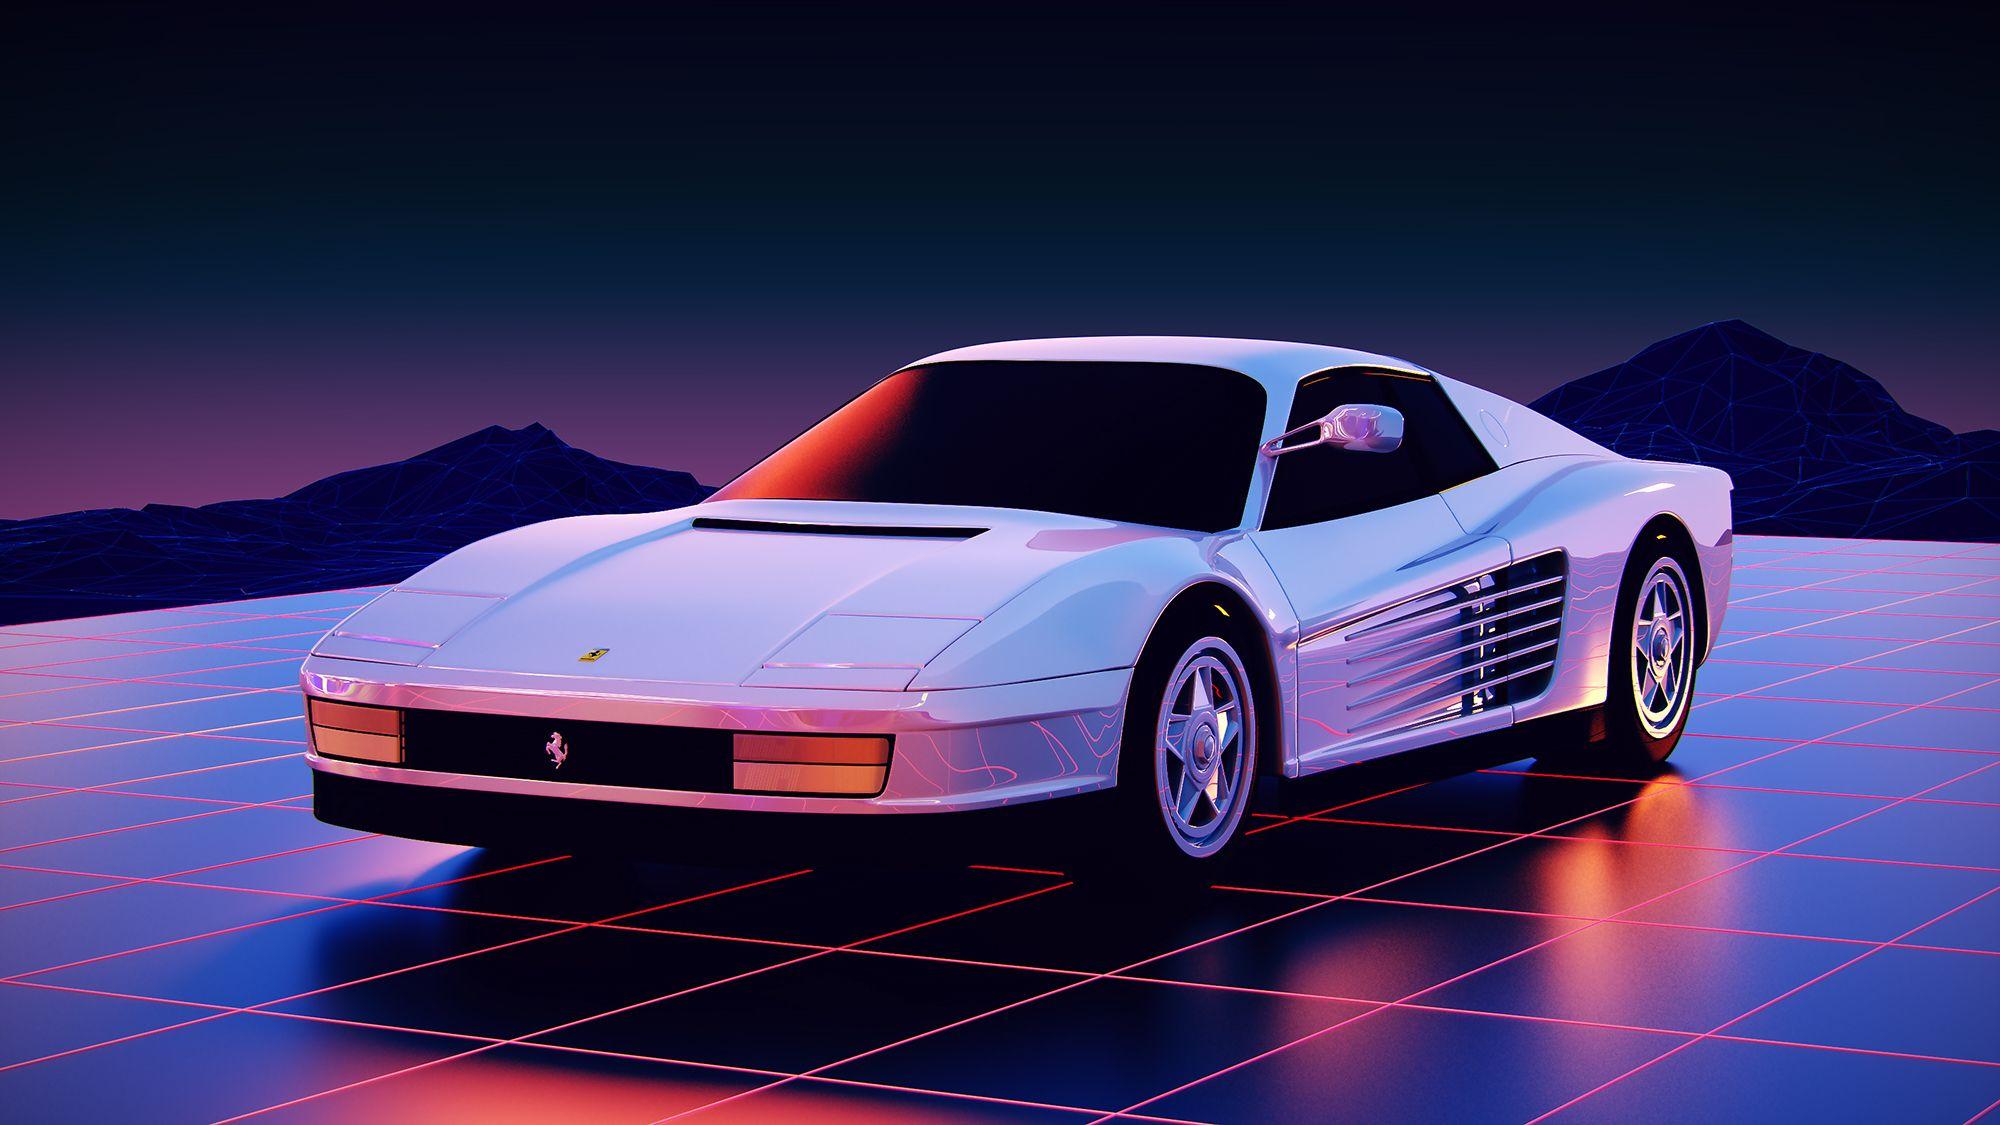 80s Cars Wallpapers - Top Free 80s Cars Backgrounds ...